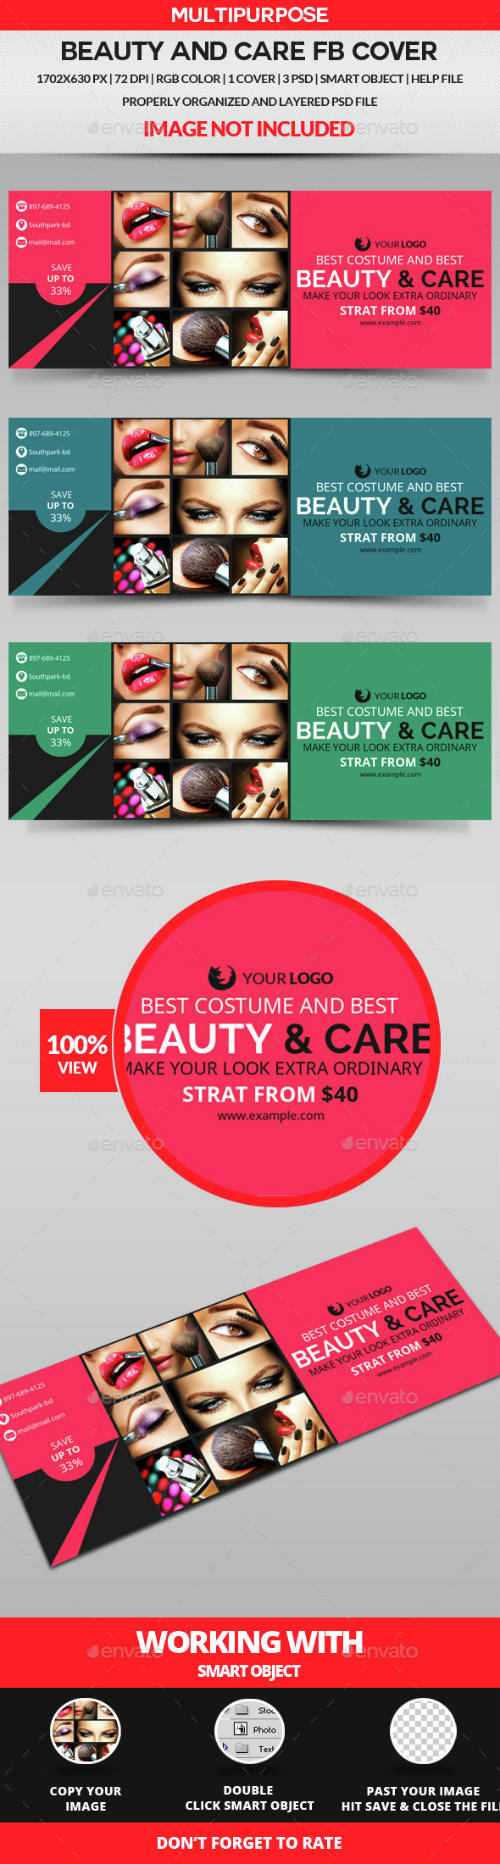 Beauty & Care Facebook Cover id 14952279